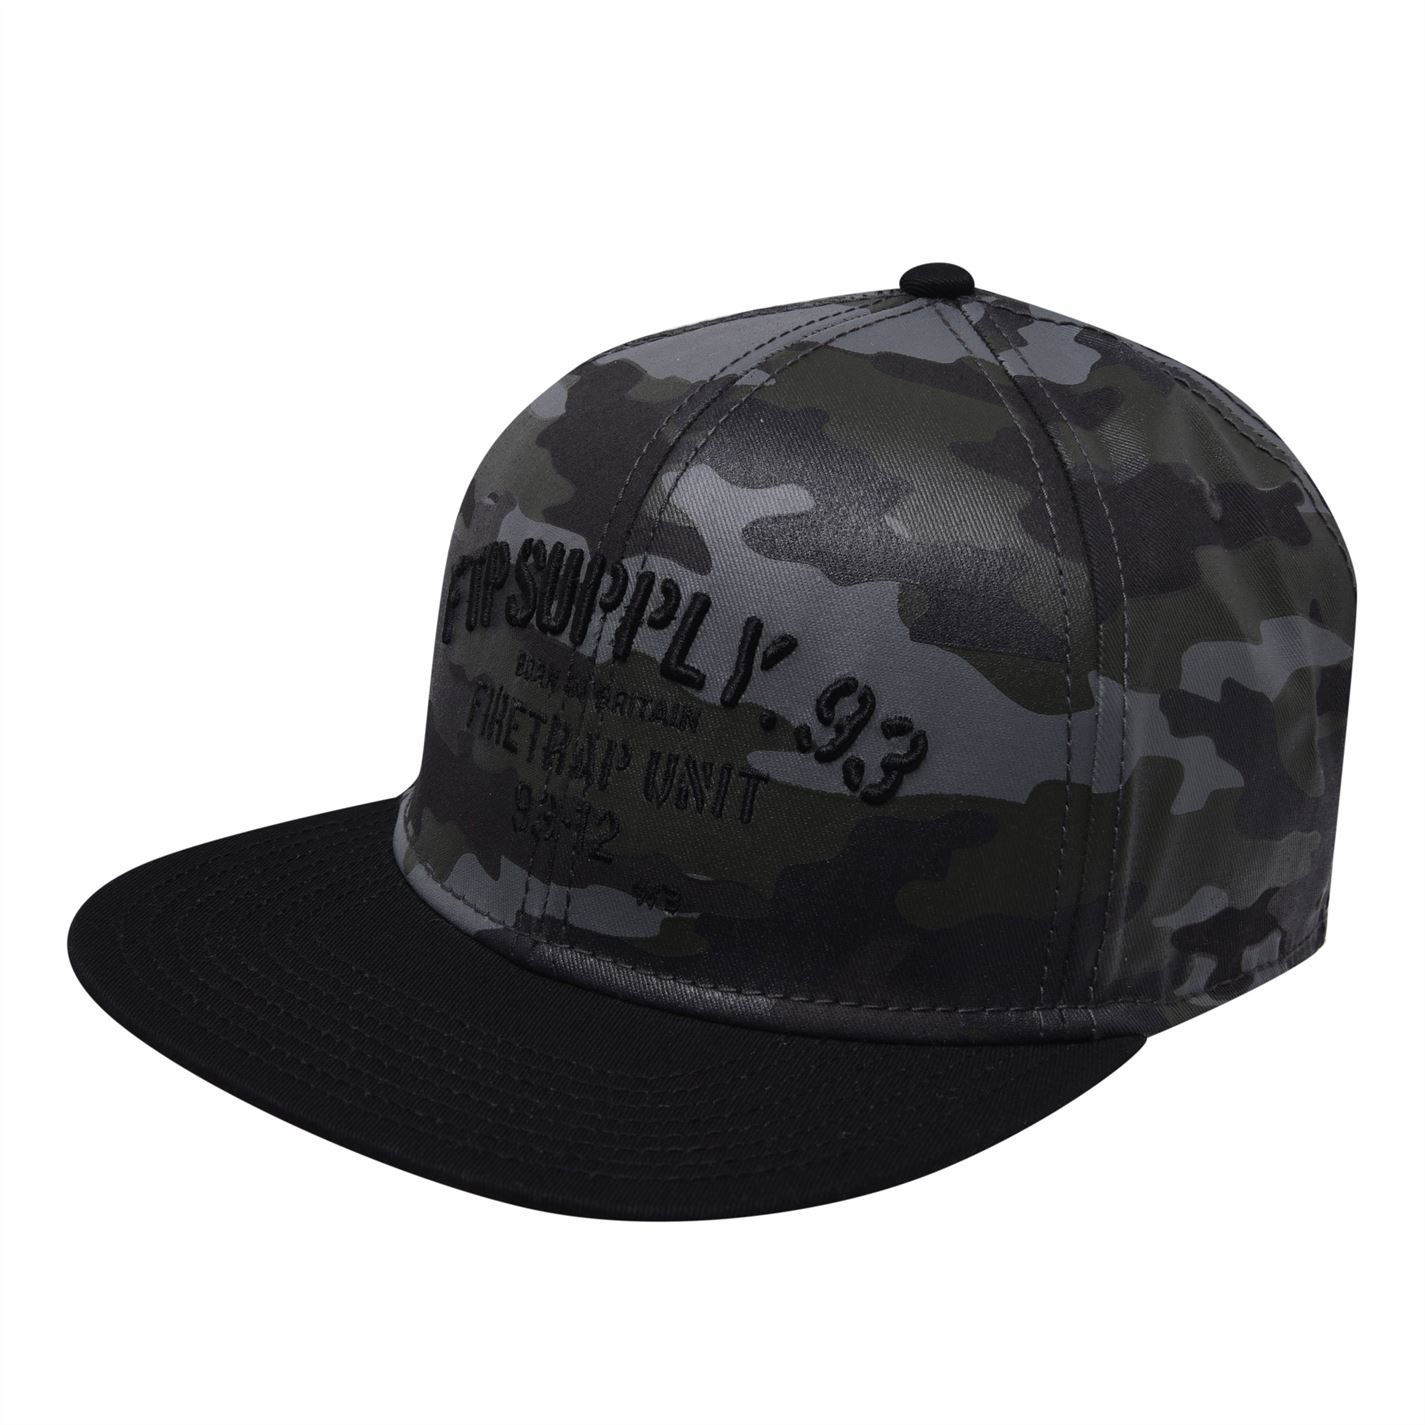 Firetrap Camo Cap - Refresh your wardrobe with the Camo Cap from Firetrap. This simple design is finished with a curved peak and secure fastening, perfect for adding a touch of style to casual outfits.